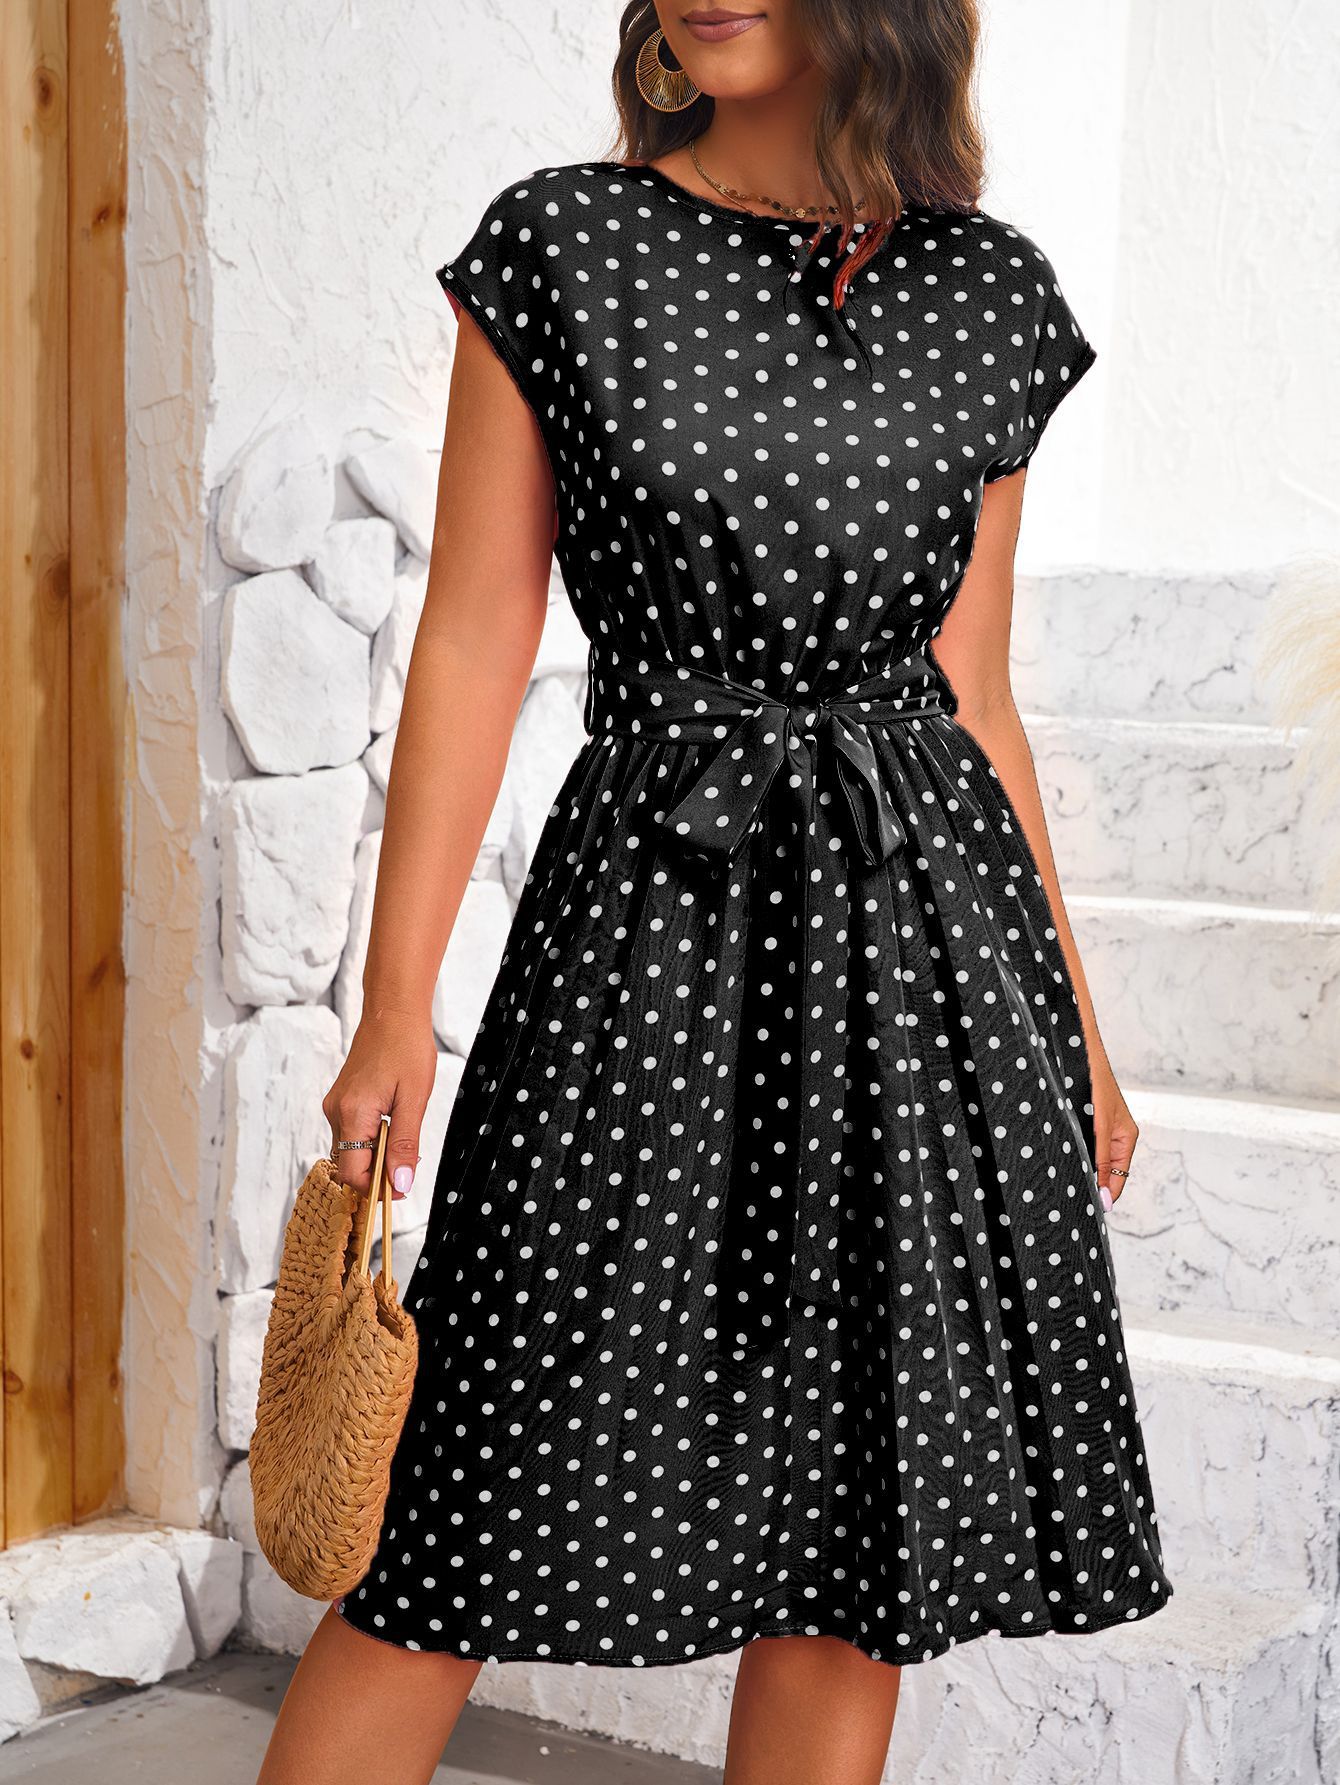 Women's Short Sleeve Lace-up Polka Dots Pleated Dress